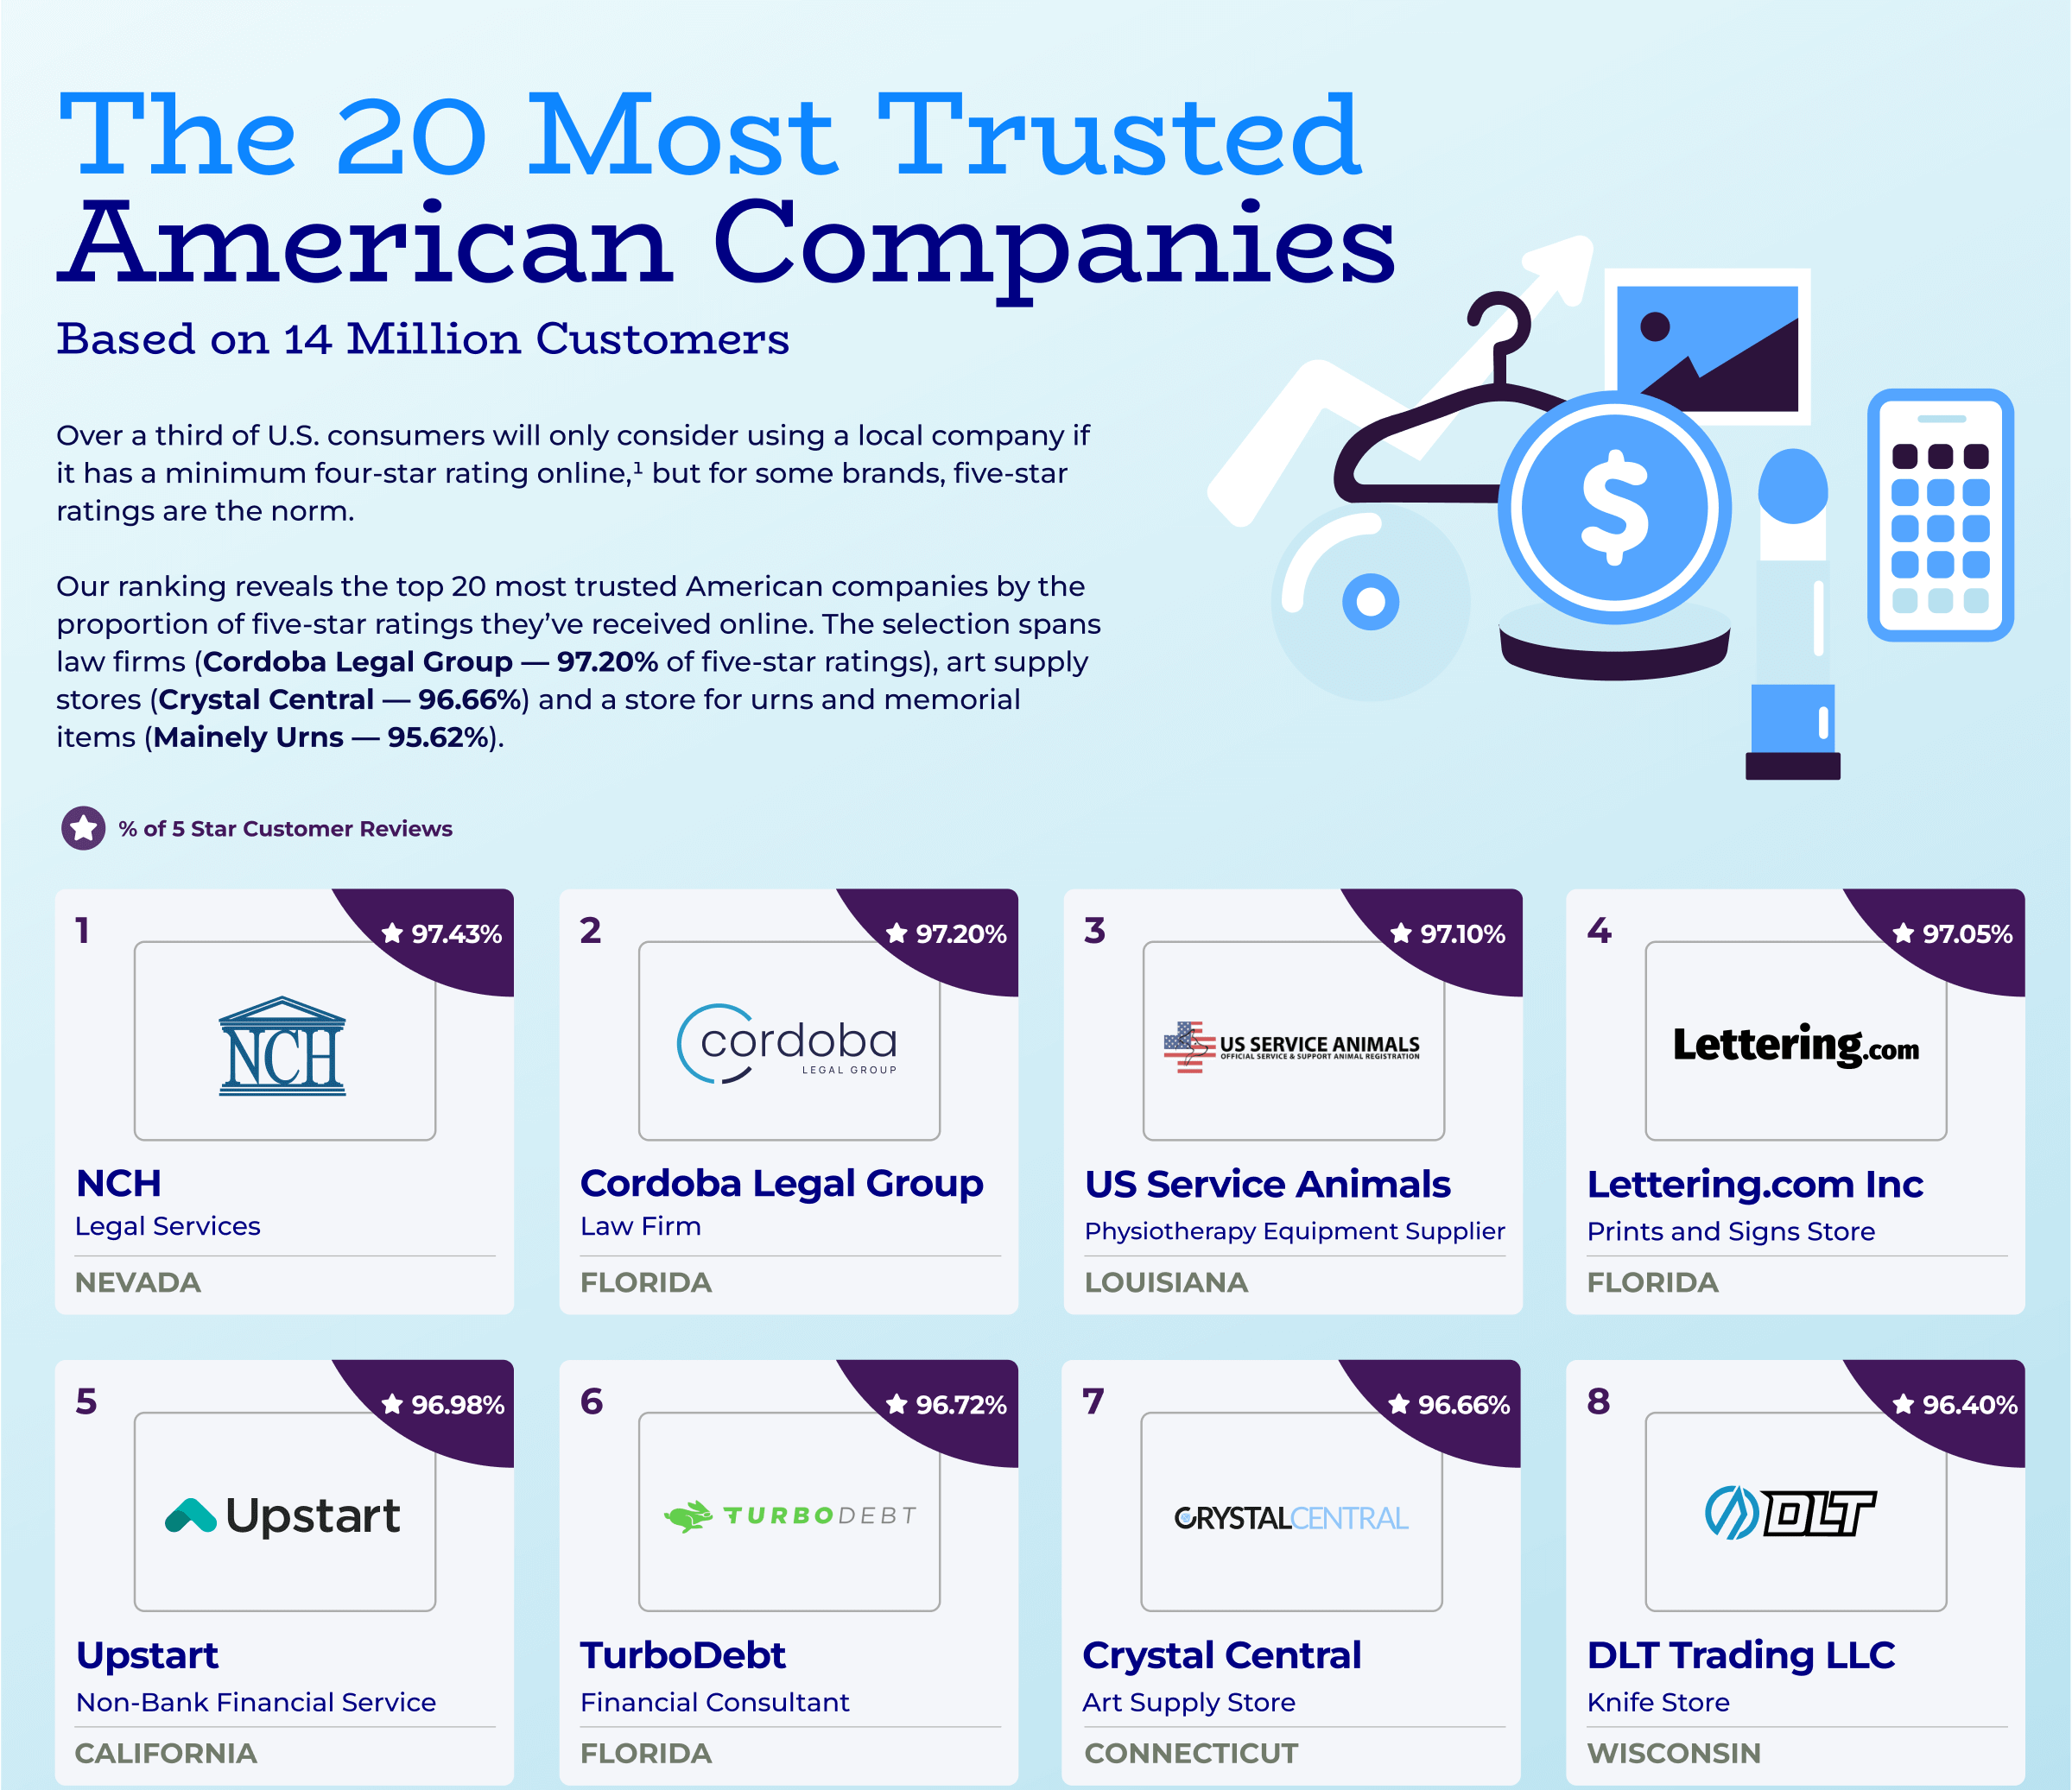 Trustpilot Reveals Most Trusted US Companies: Nevada Corporate Headquarters and Cordoba Legal Group lead with impressive 97% 5-star ratings.